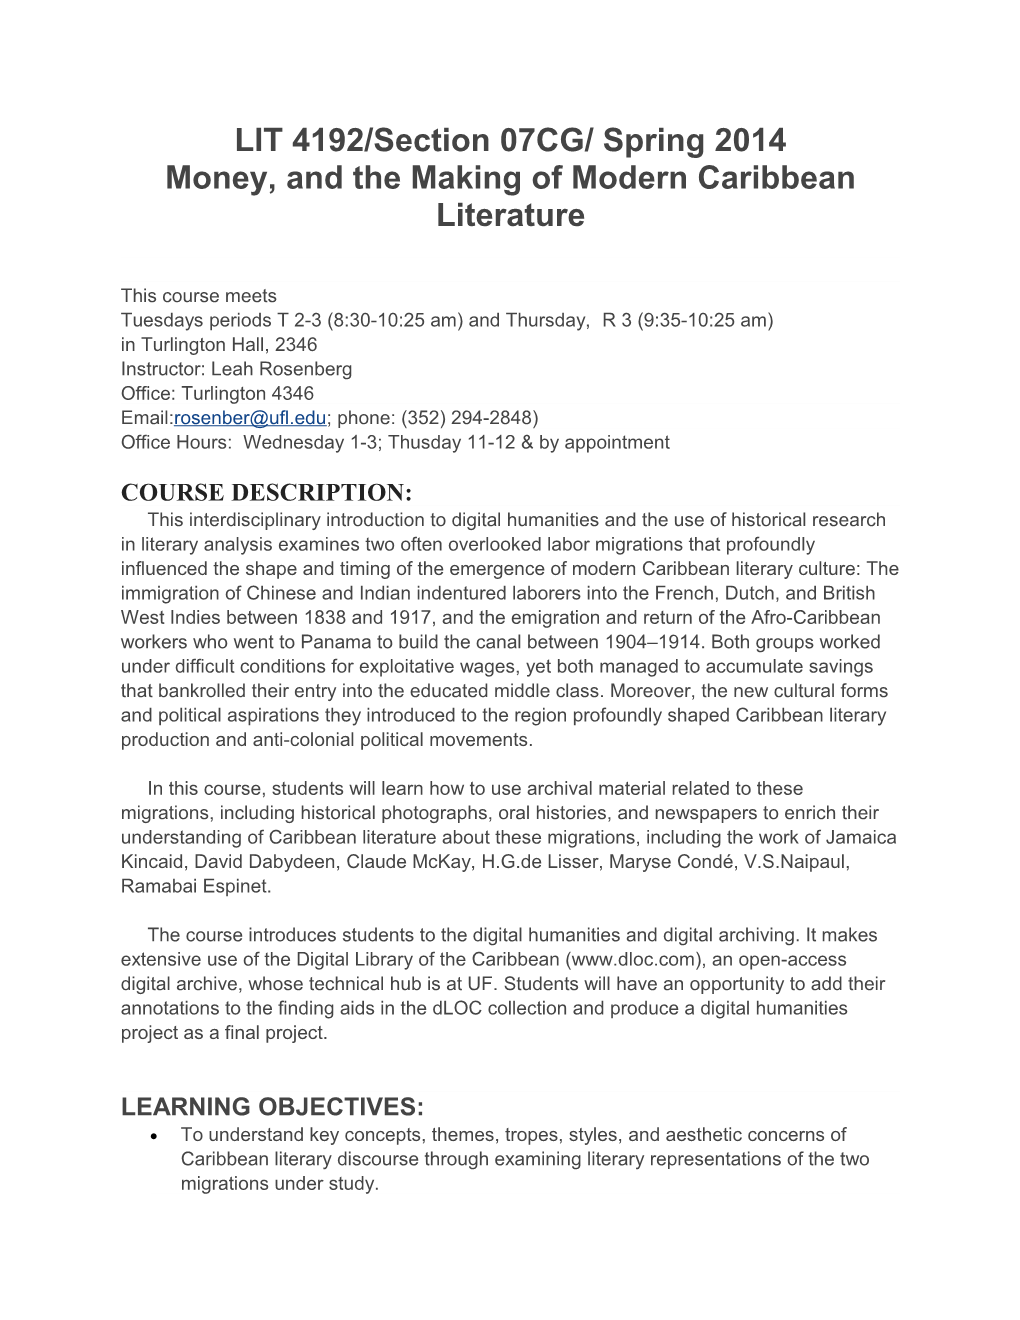 Money, and the Making of Modern Caribbean Literature